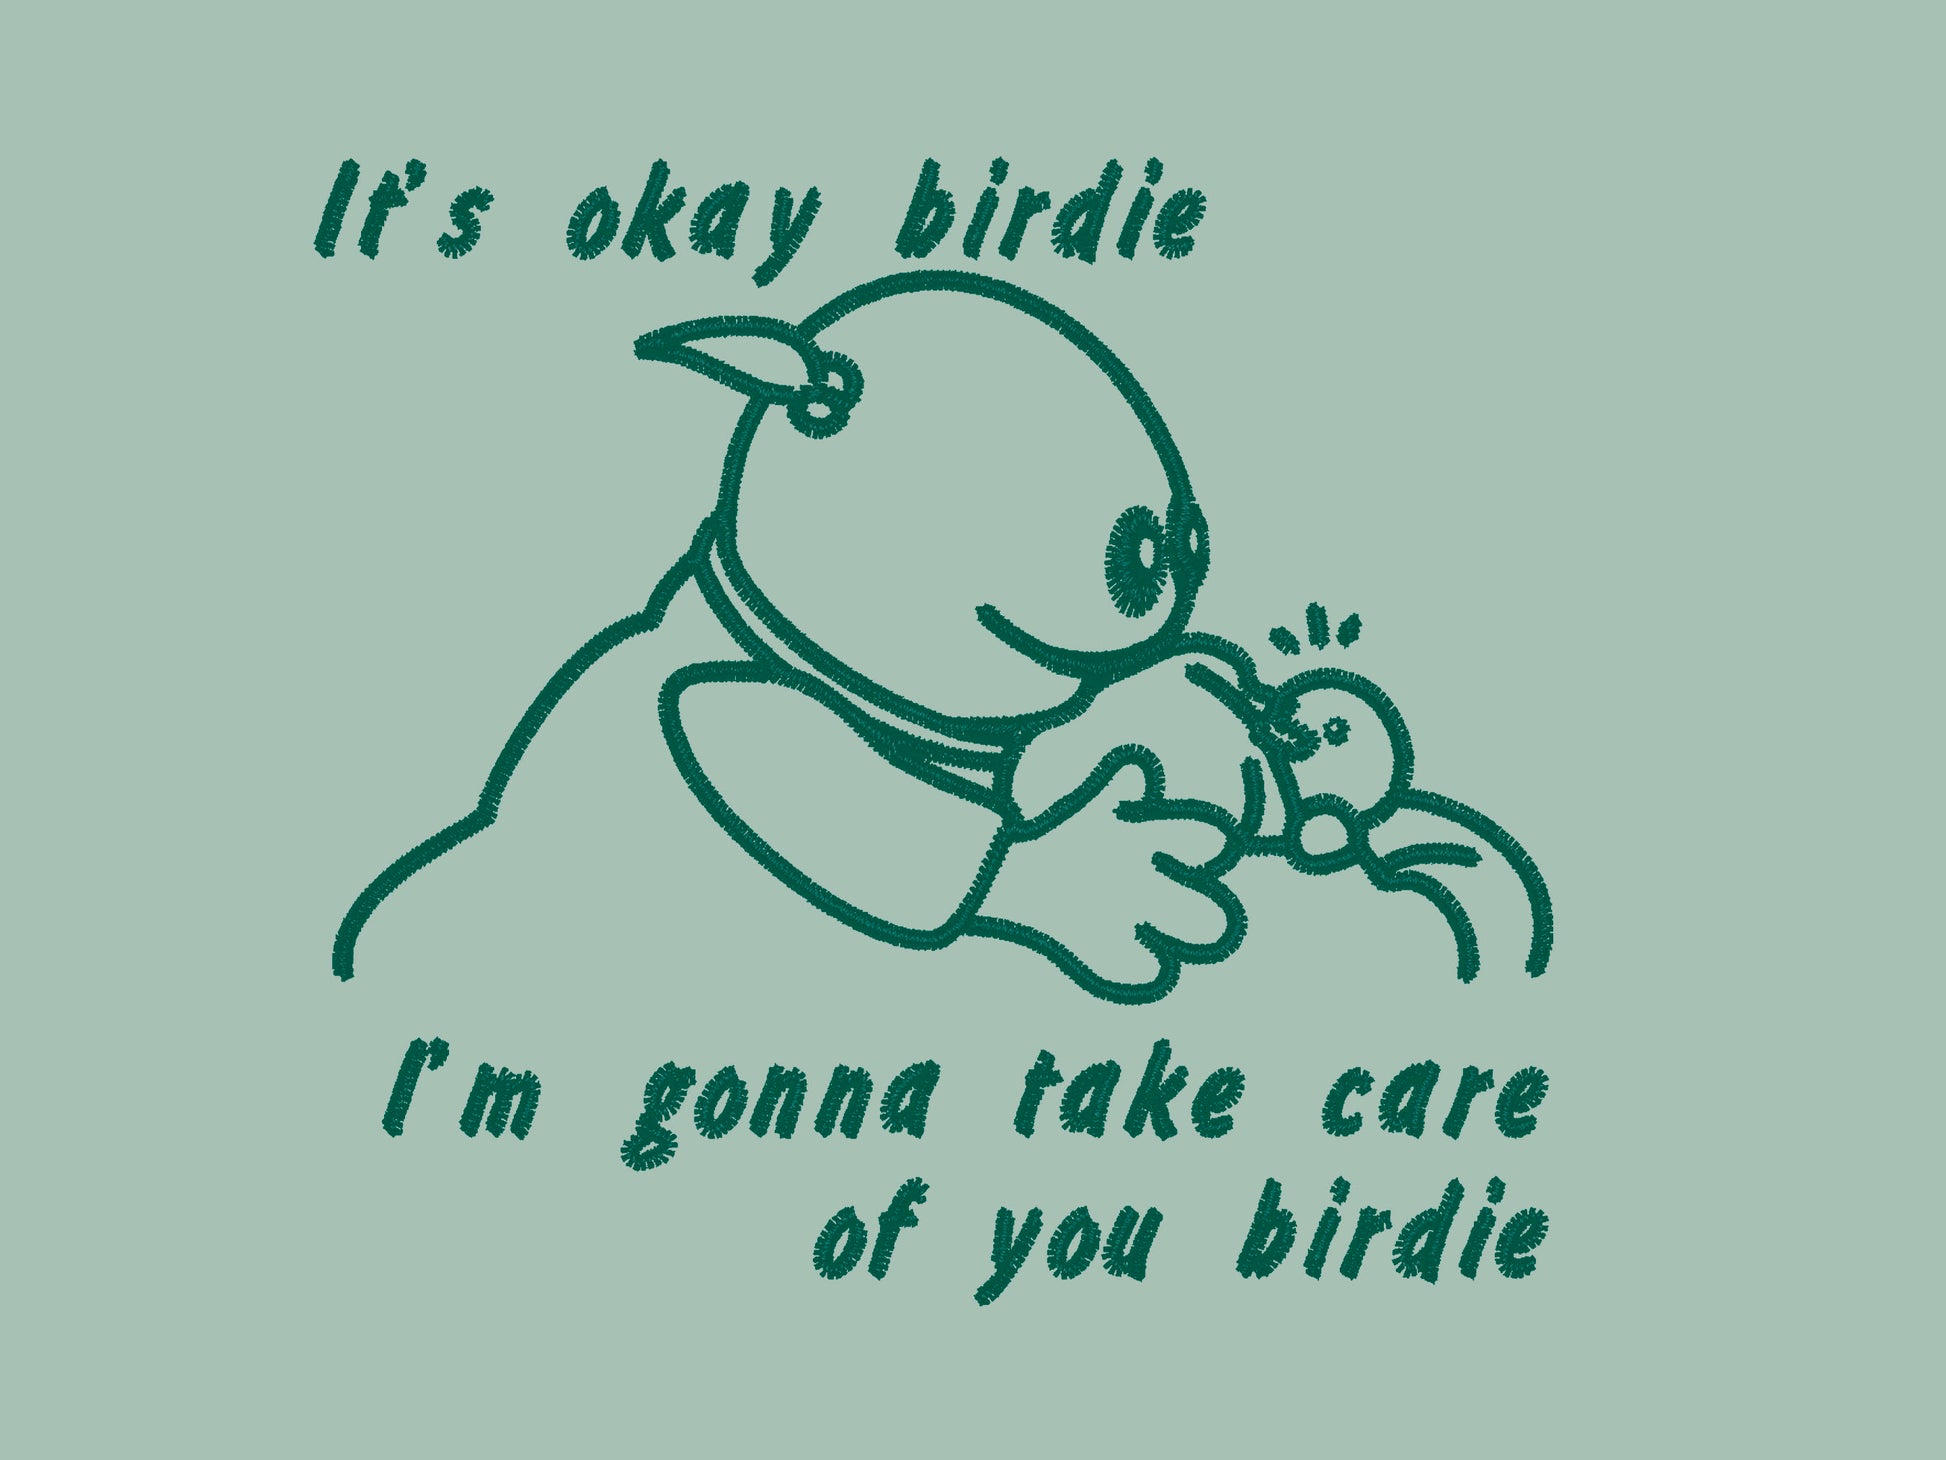 Green embroidered t-shirt design of Mona from Nanalan comforting Birdie with the text It's okay Birdie I'm gonna take care of you birdie